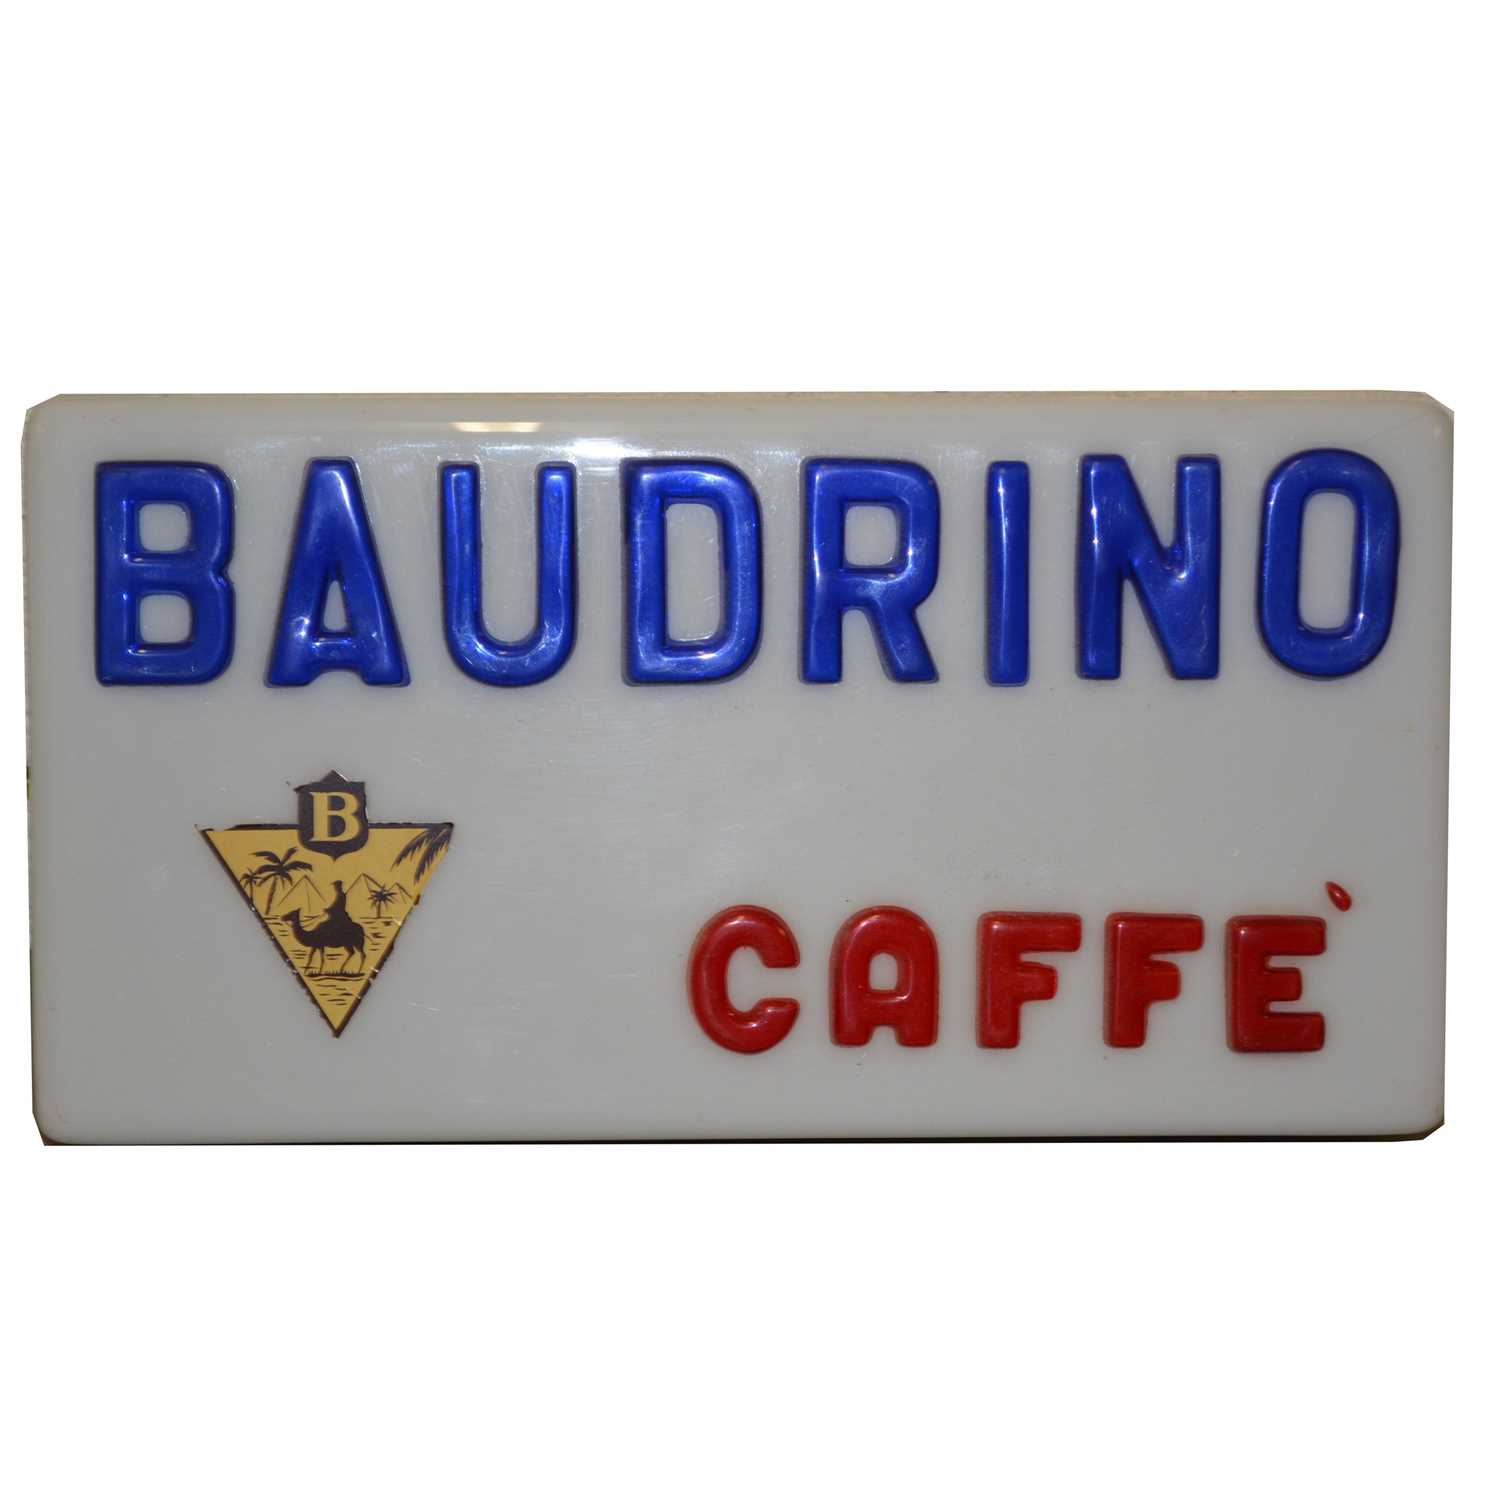 Lot 732 - Original railway station cafe sign 'Baudrino Caffee', unlimited plastic case.